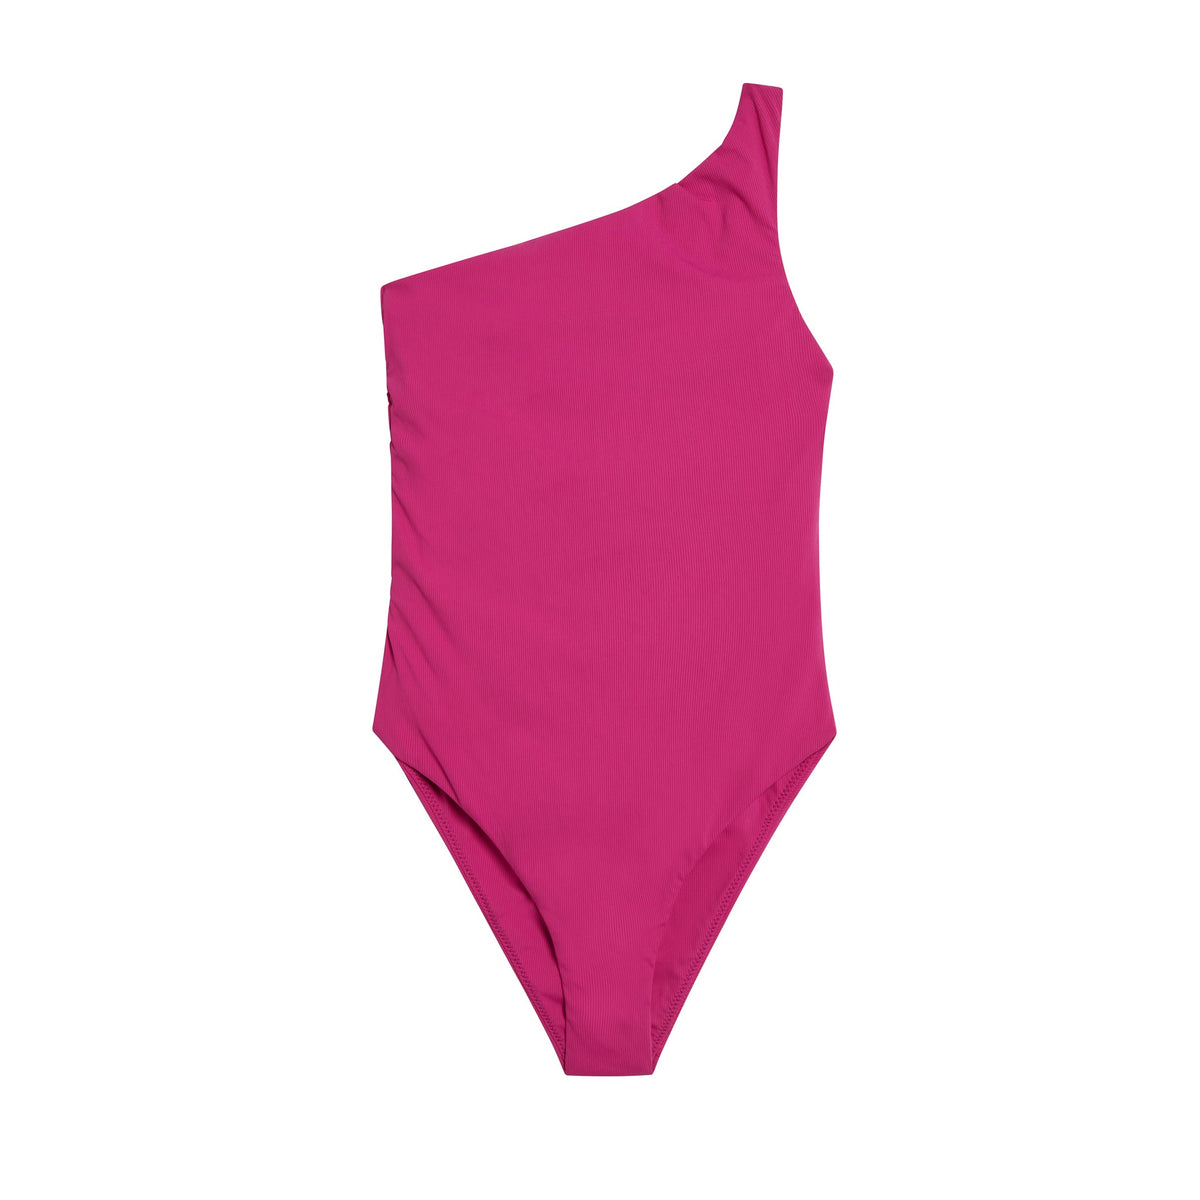 The Lotta One Piece in Framboise Luxe Rib